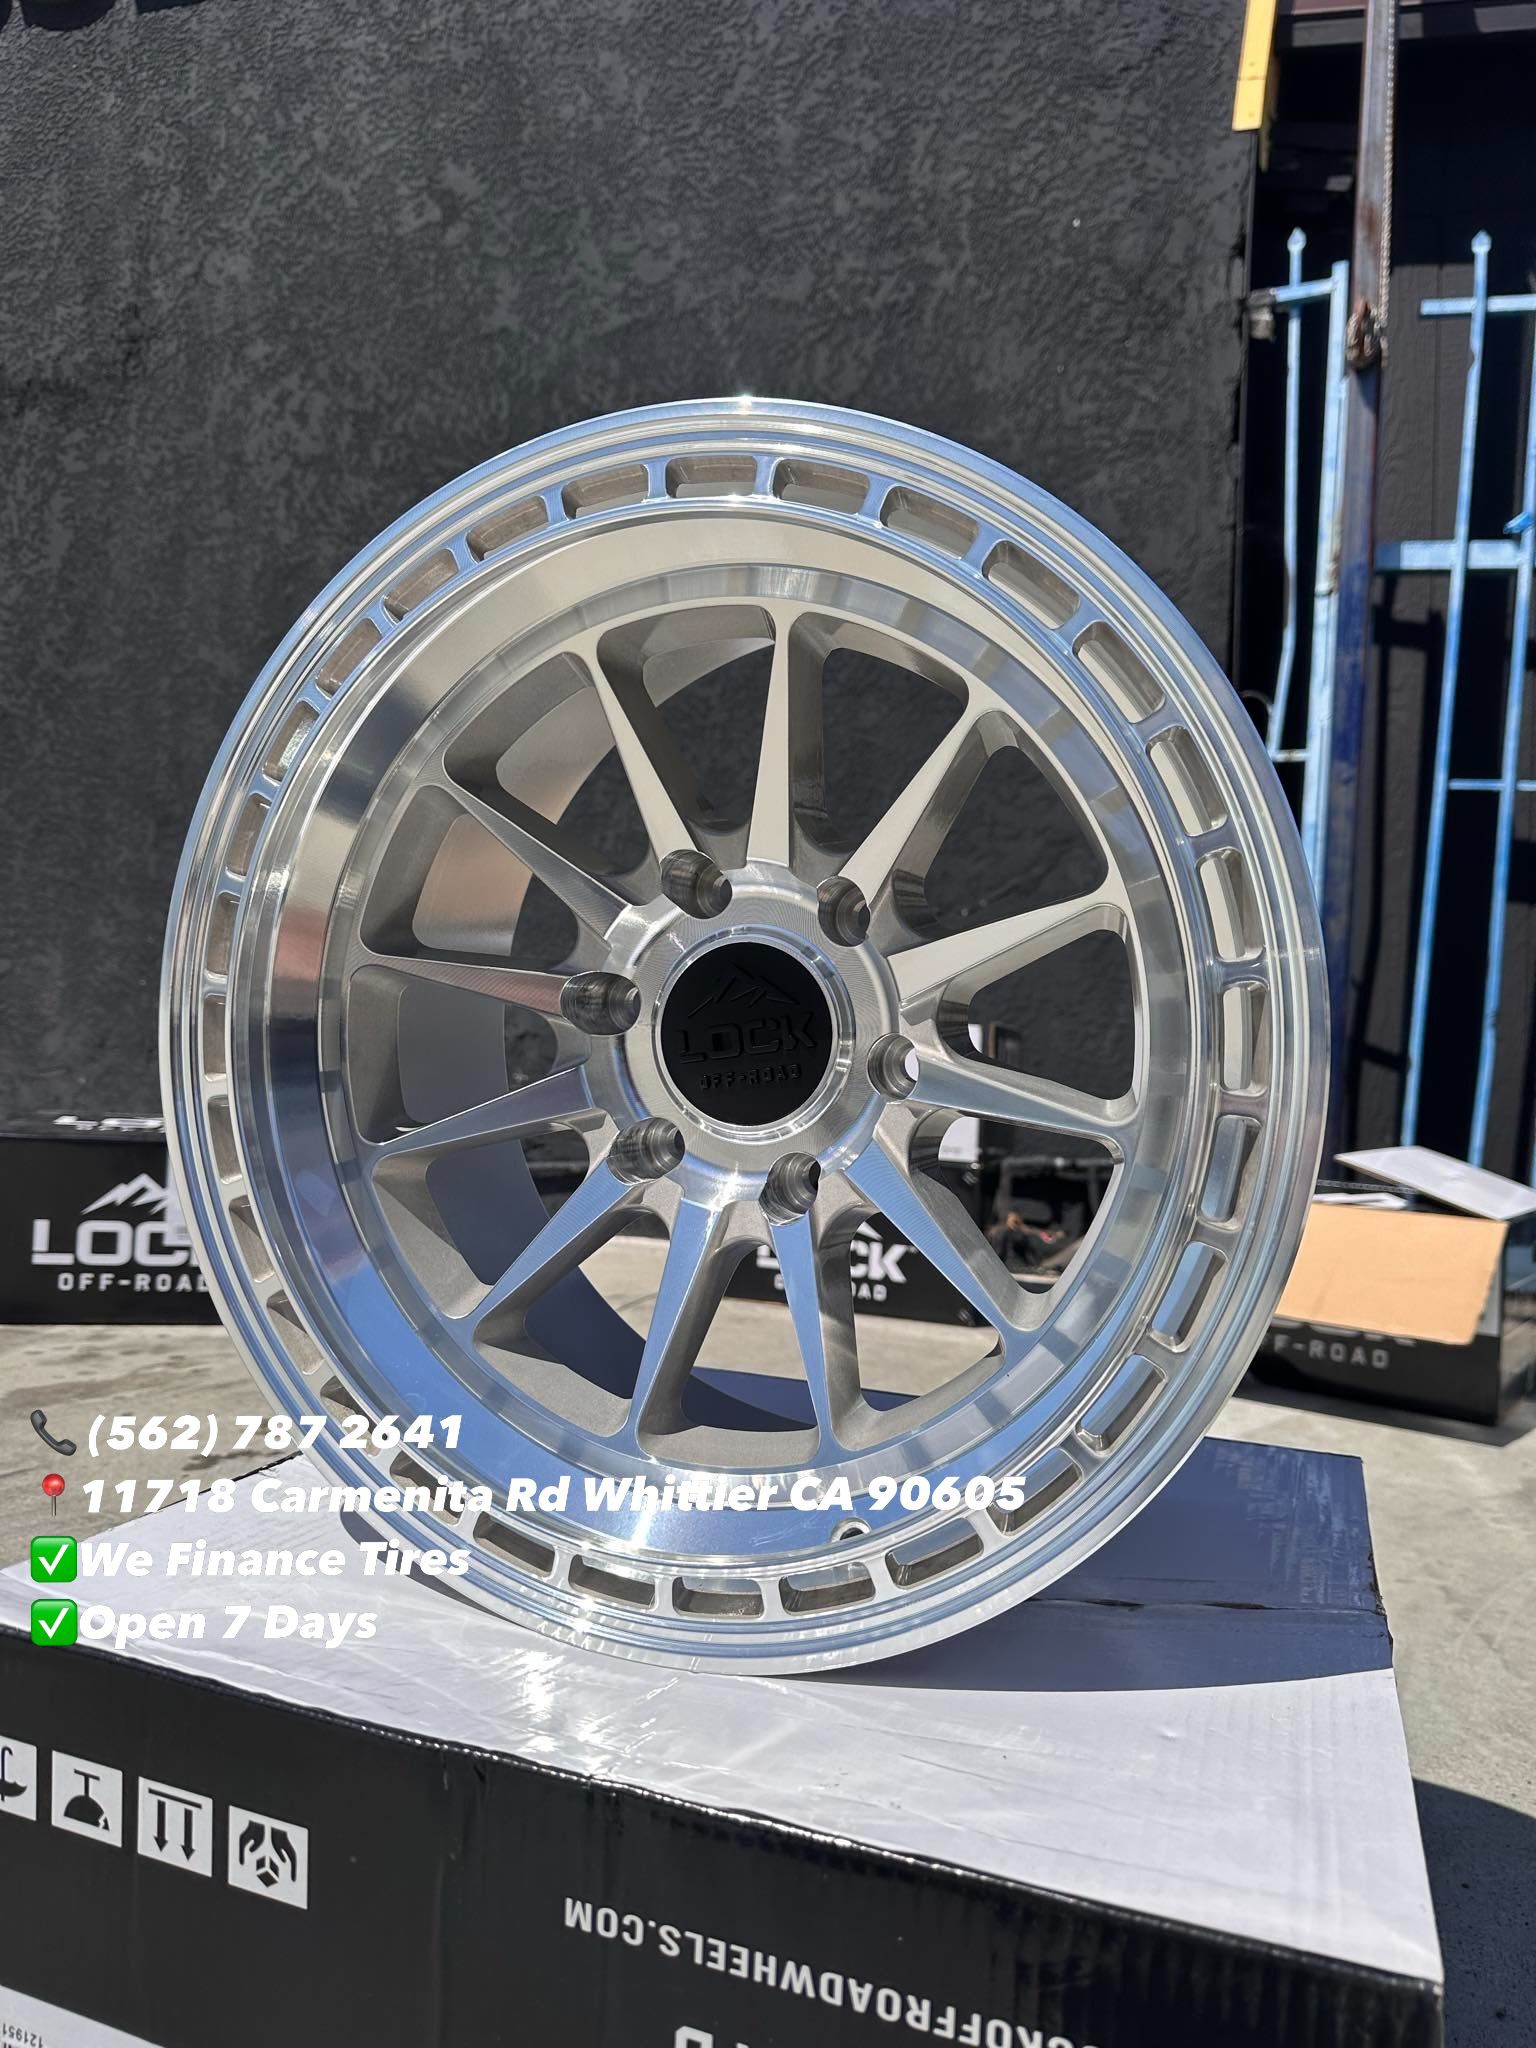 Baja Off Road Wheels 6x139.7 GMC Toyota Chevy Nissan Ford And More Available 